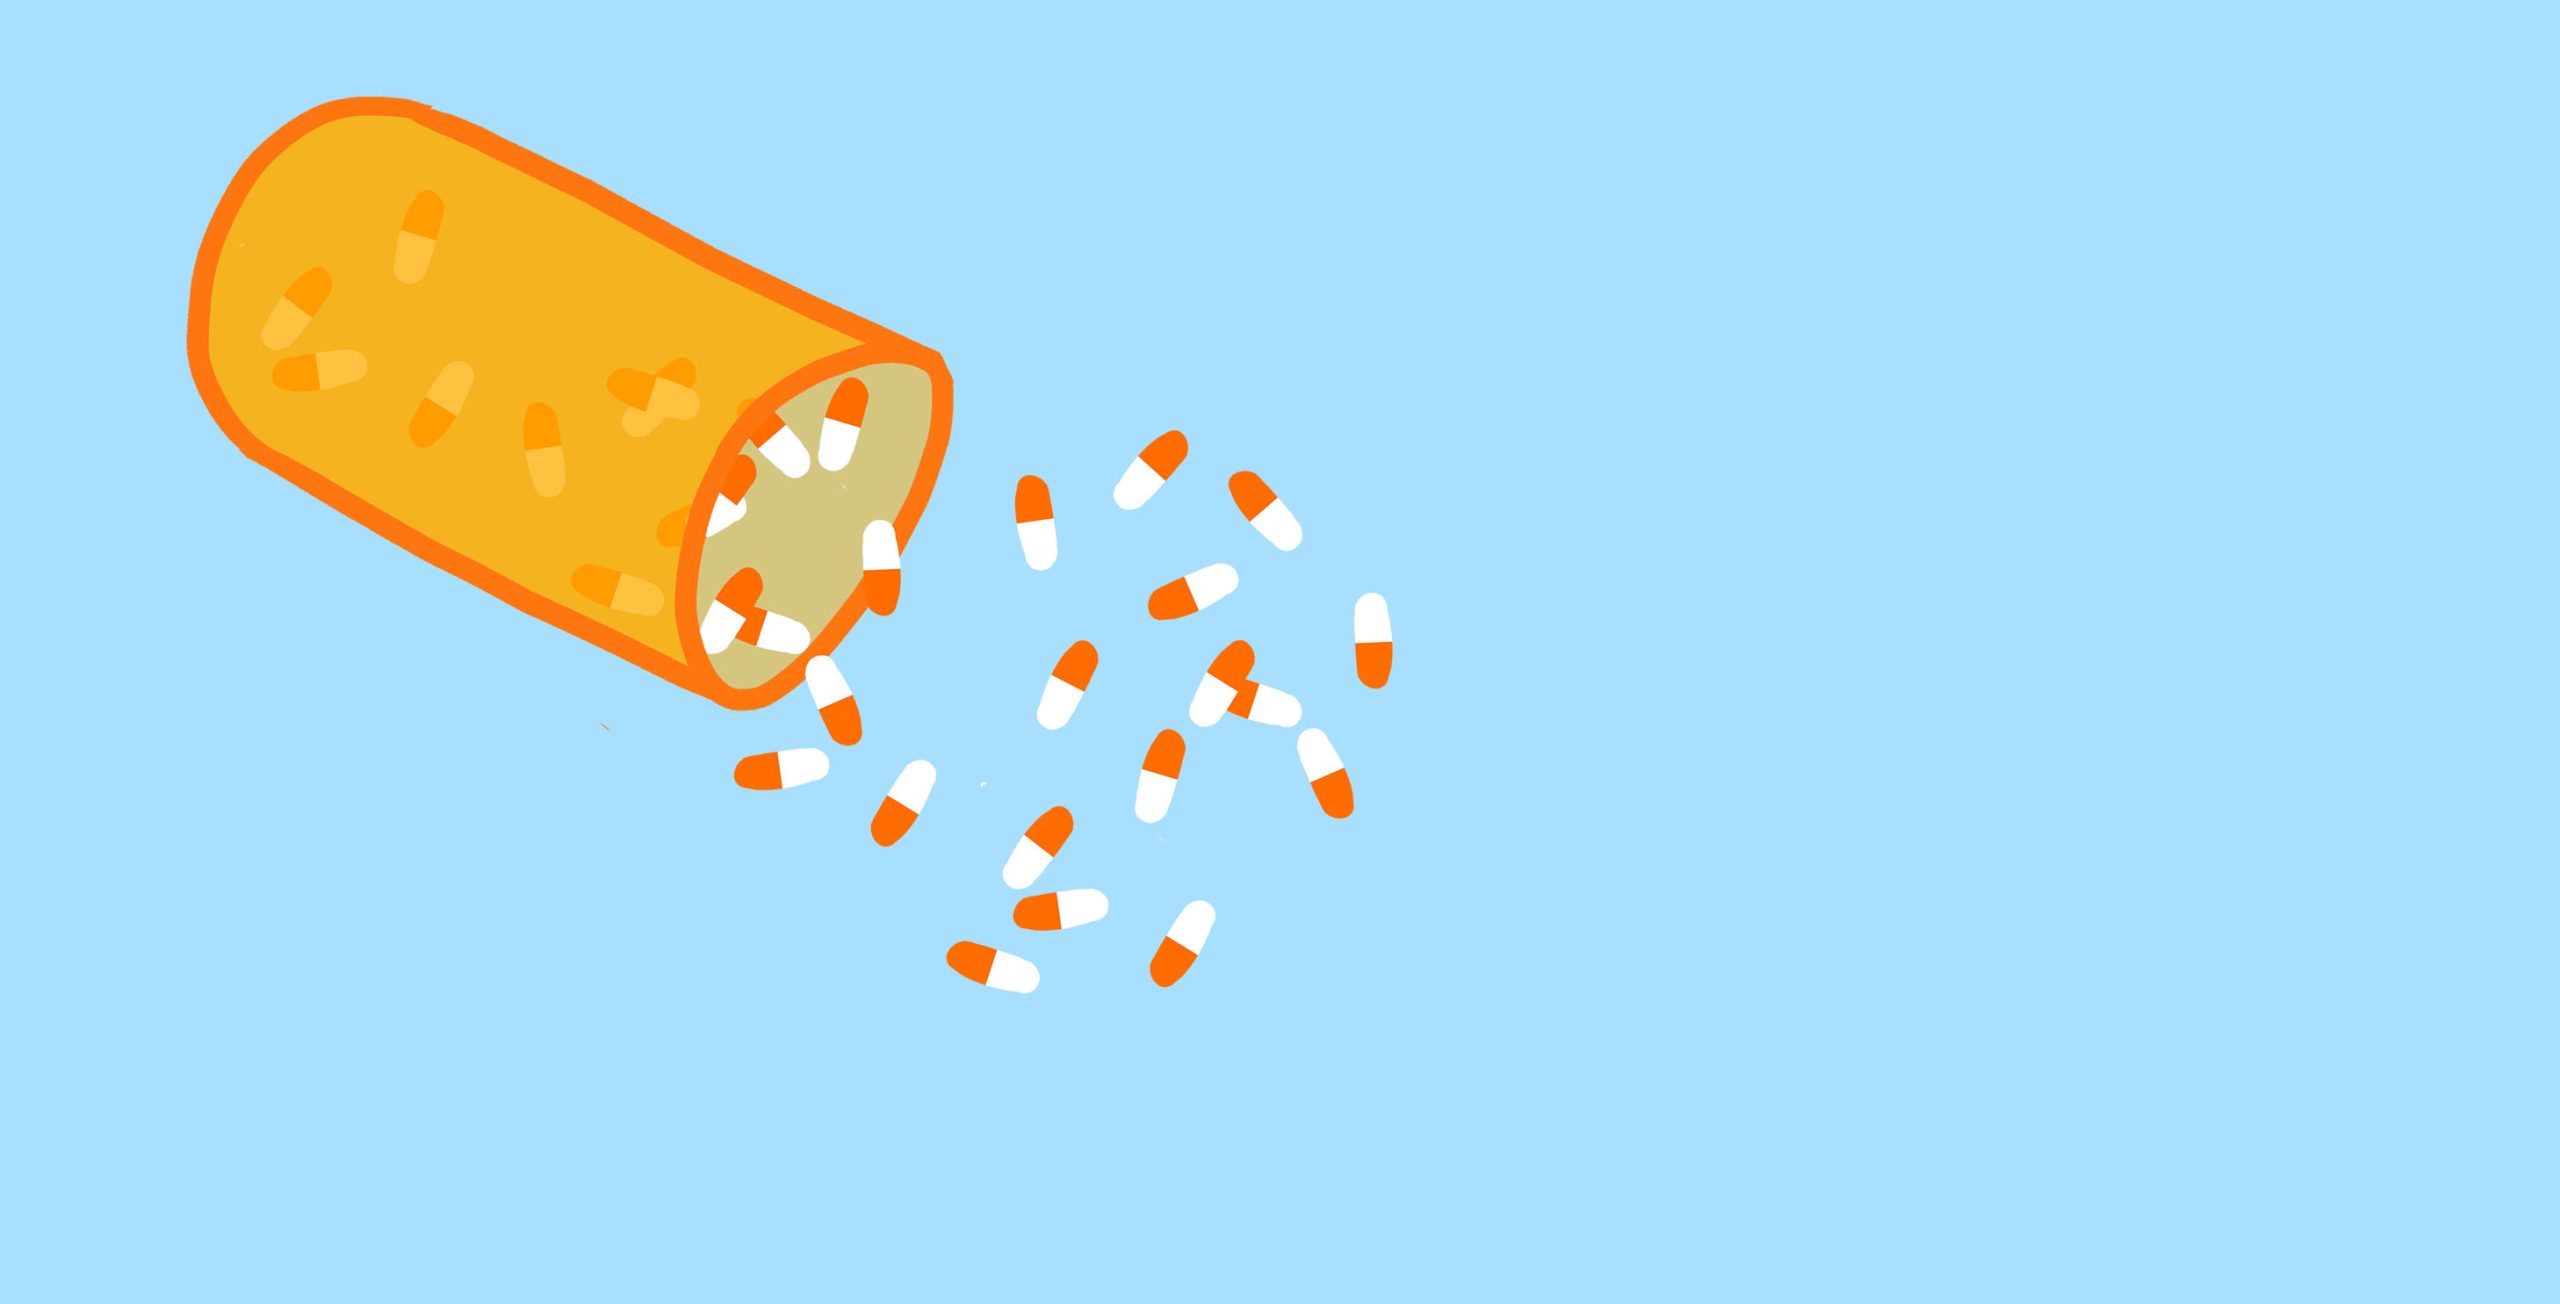 Adderall: The pill for all of your problems?